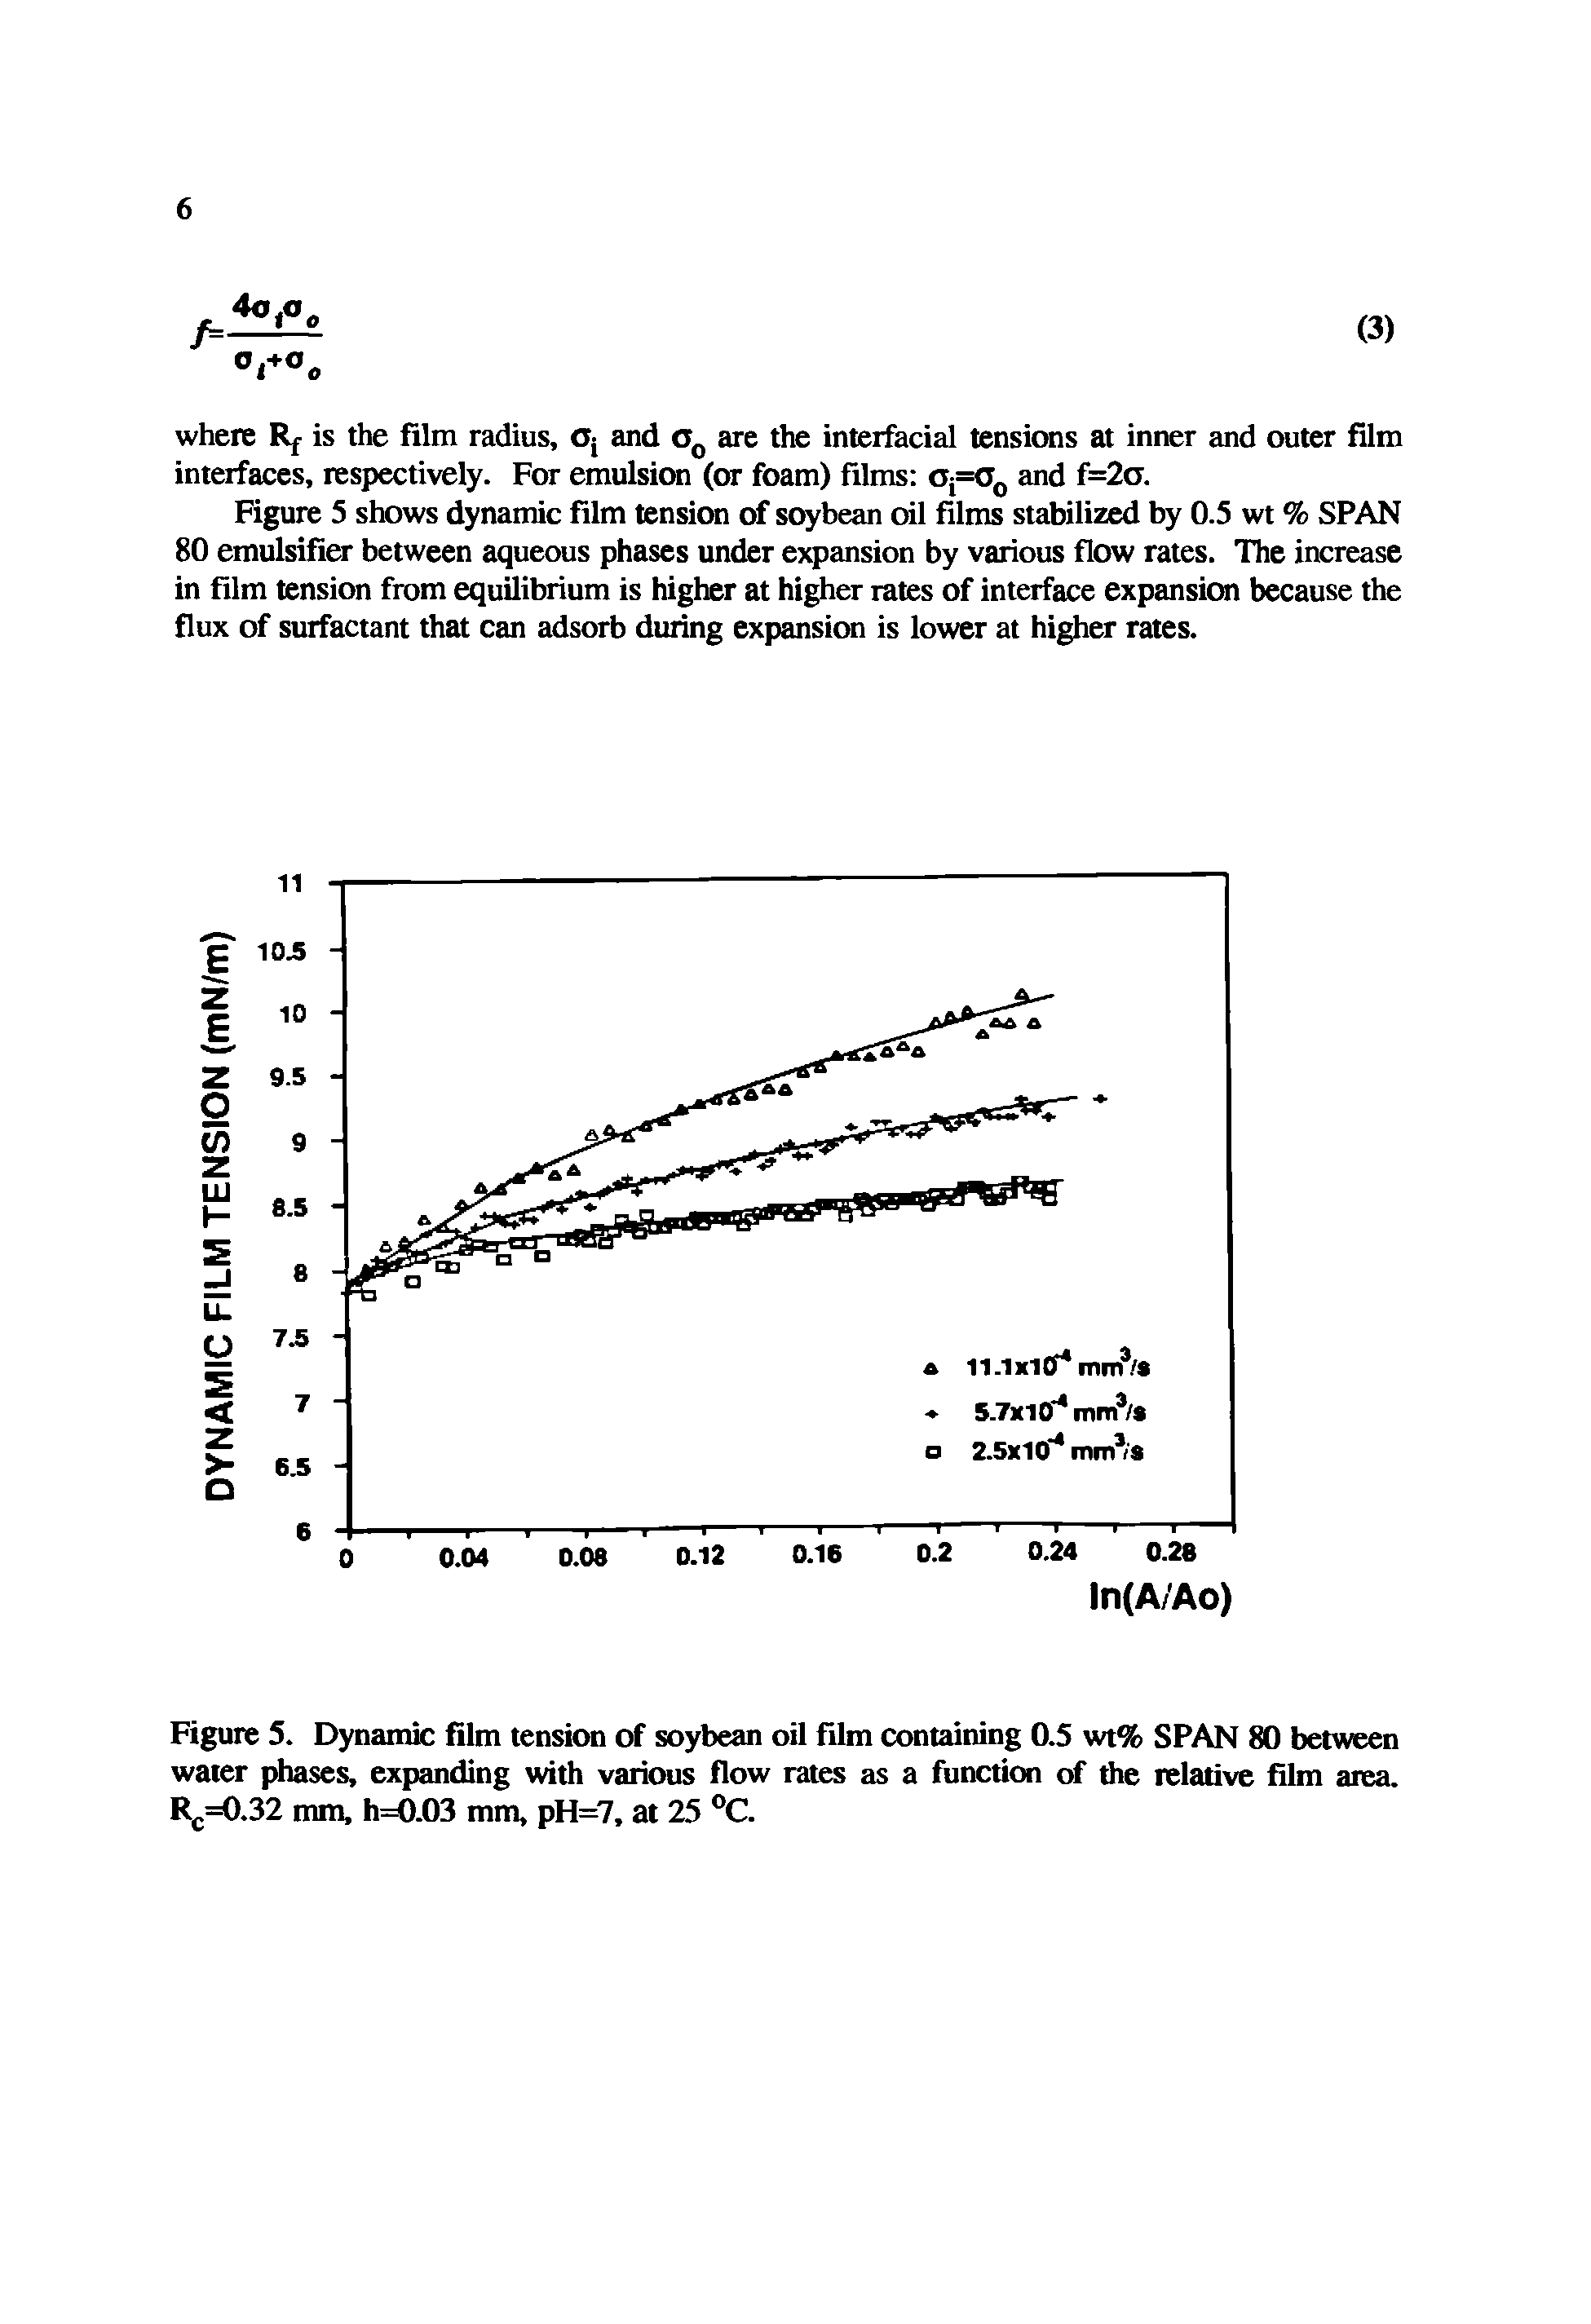 Figure 5. Dynamic film tension of soybean oil film containing 0.5 wt% SPAN 80 between water phases, expanding with various flow rates as a function of the relative film area. Rc=0.32 mm, h=0.03 mm, pH=7, at 25 °C.